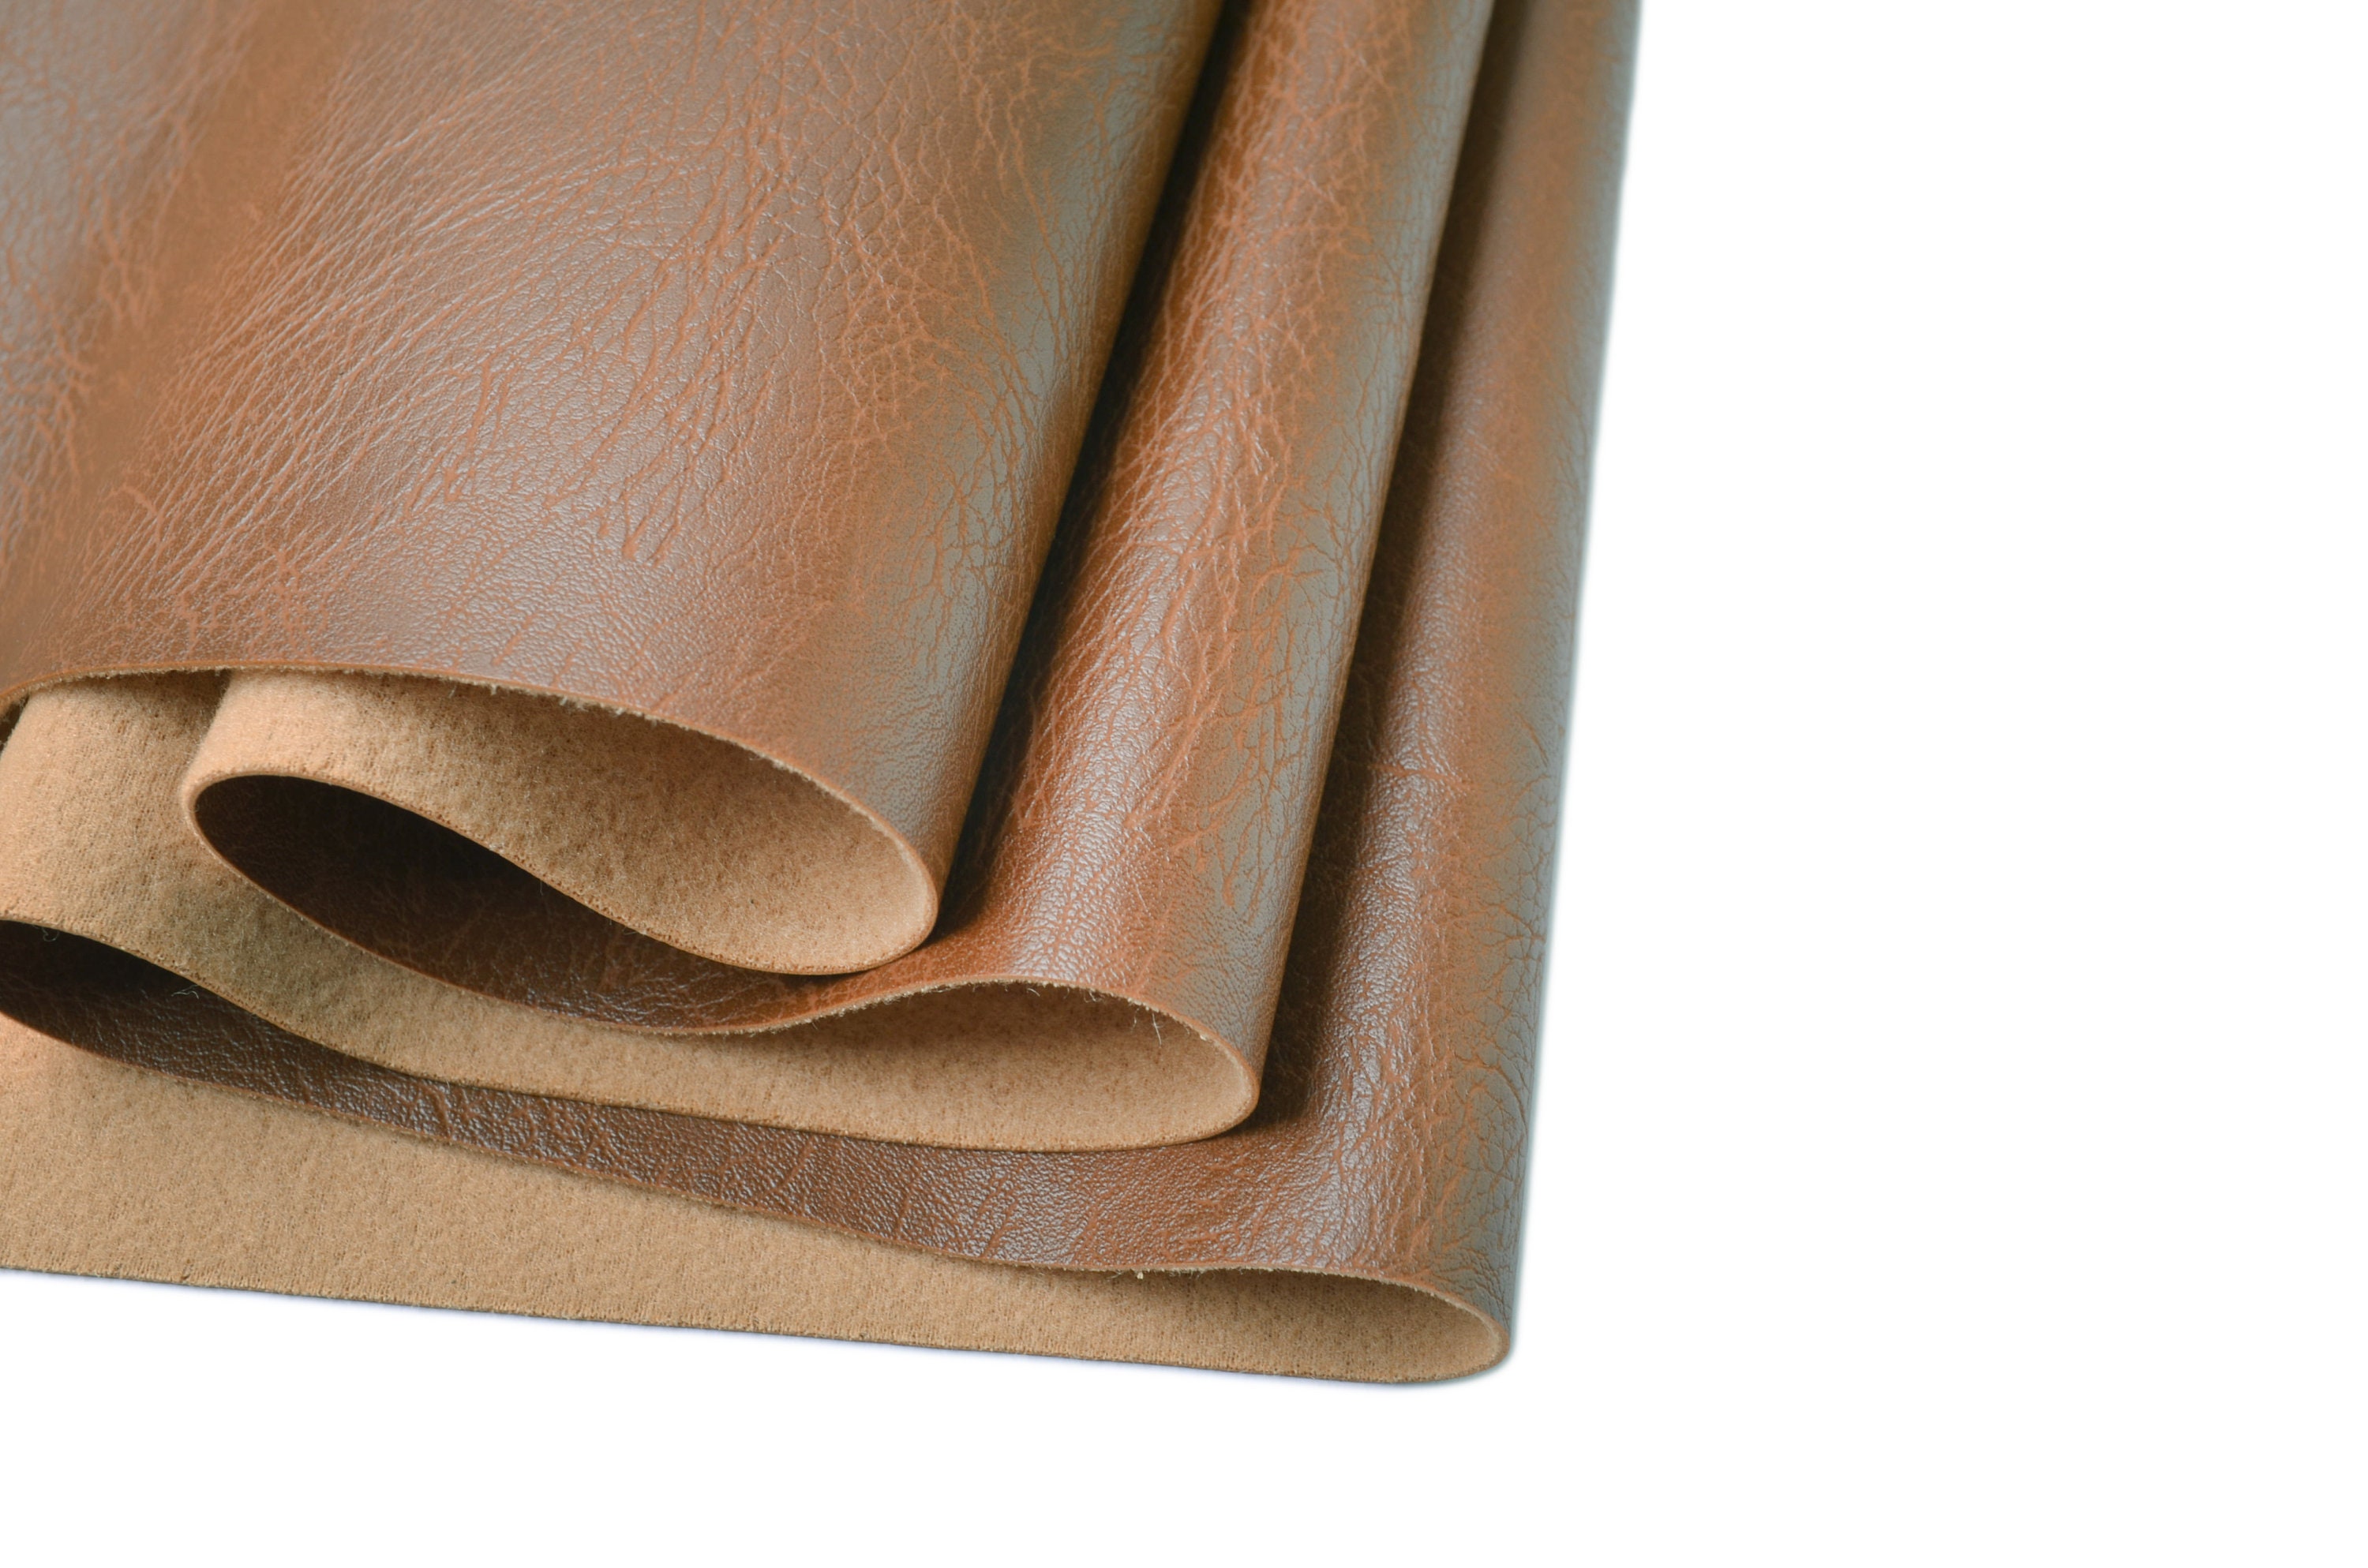  Synthetic Leather Fabric Soft Soft Thin Width 138cm